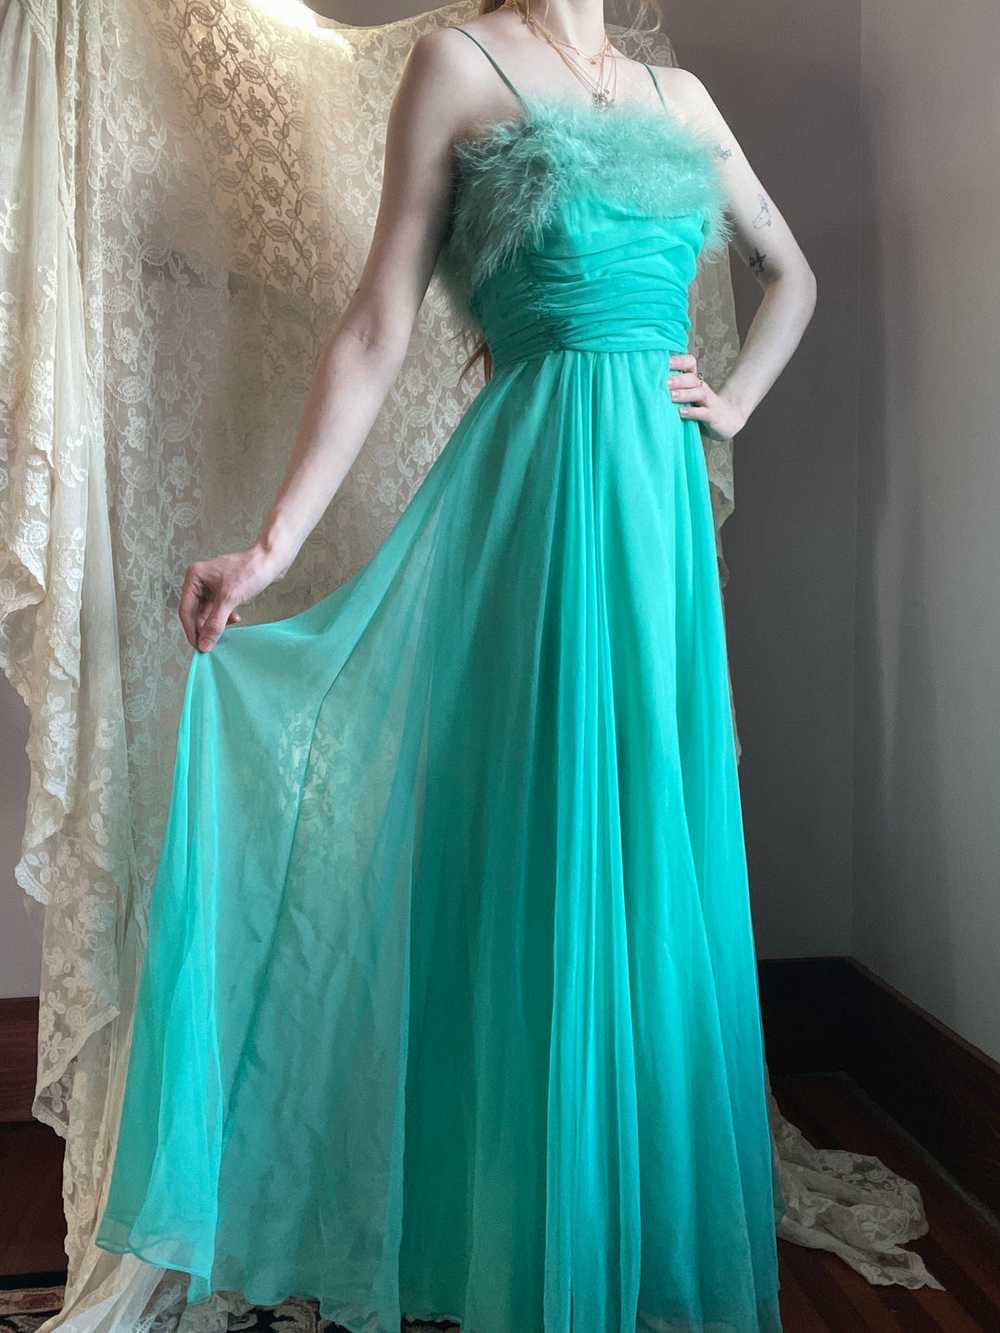 1960s Marabou Feather Green Chiffon Gown Dress - image 4